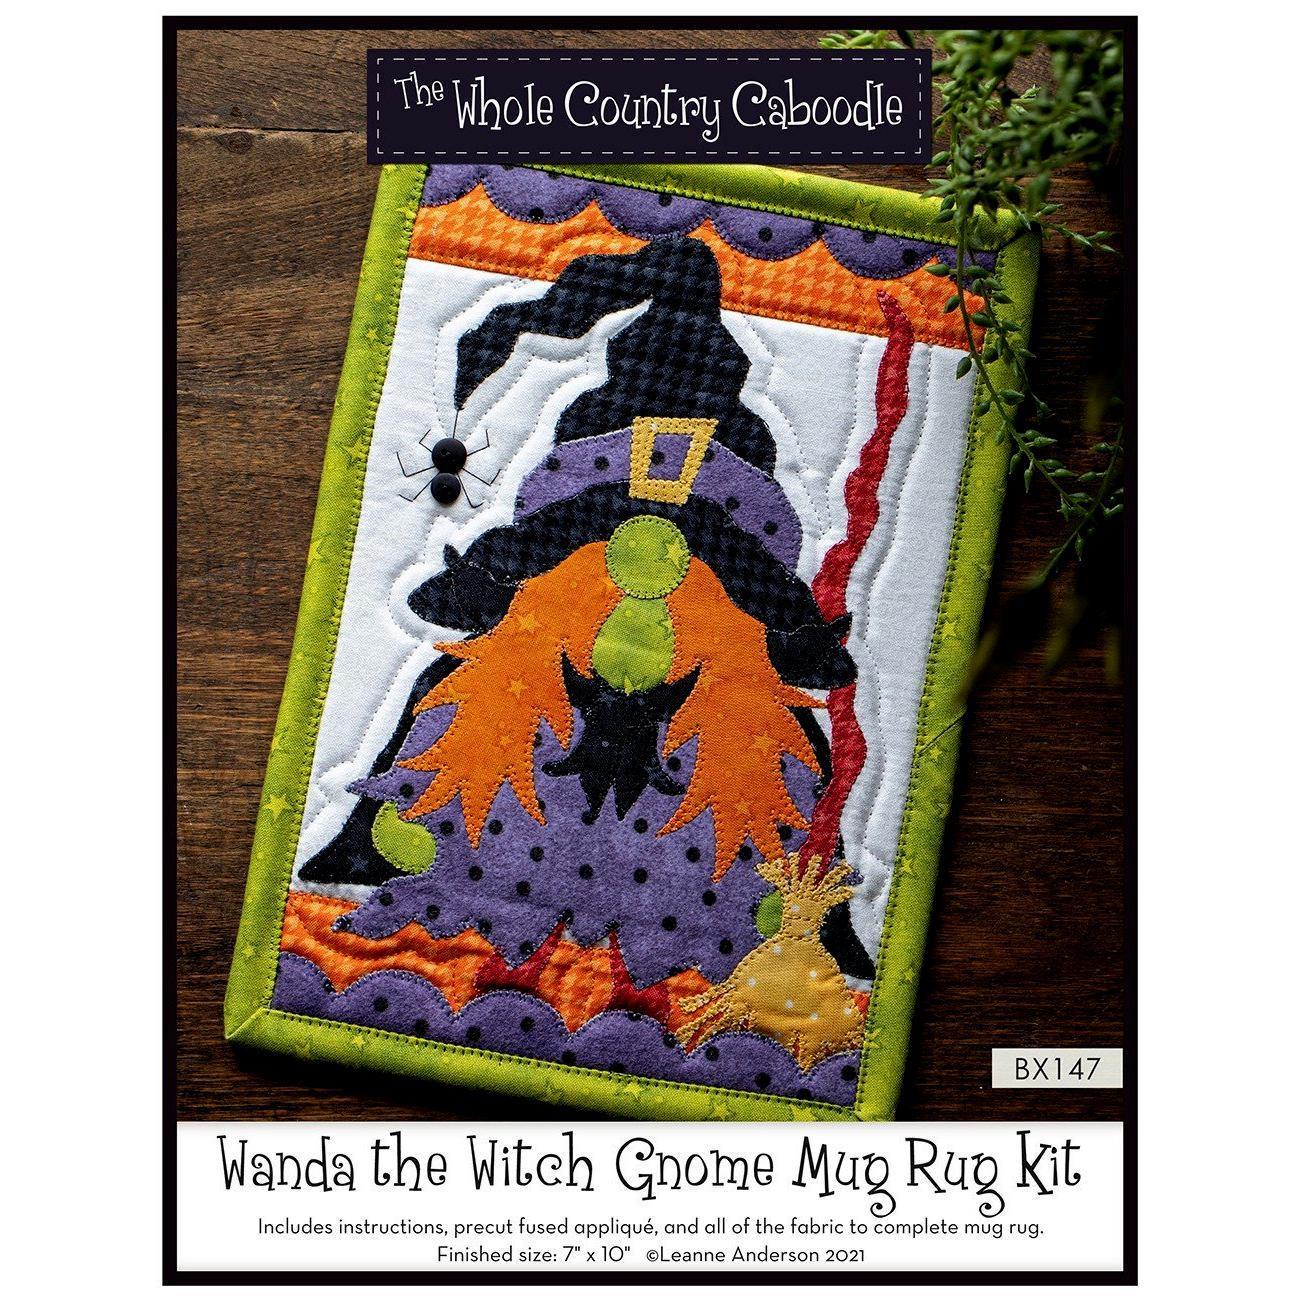 Wanda the Witch Gnome Mug Rug Kit-The Whole Country Caboodle-My Favorite Quilt Store